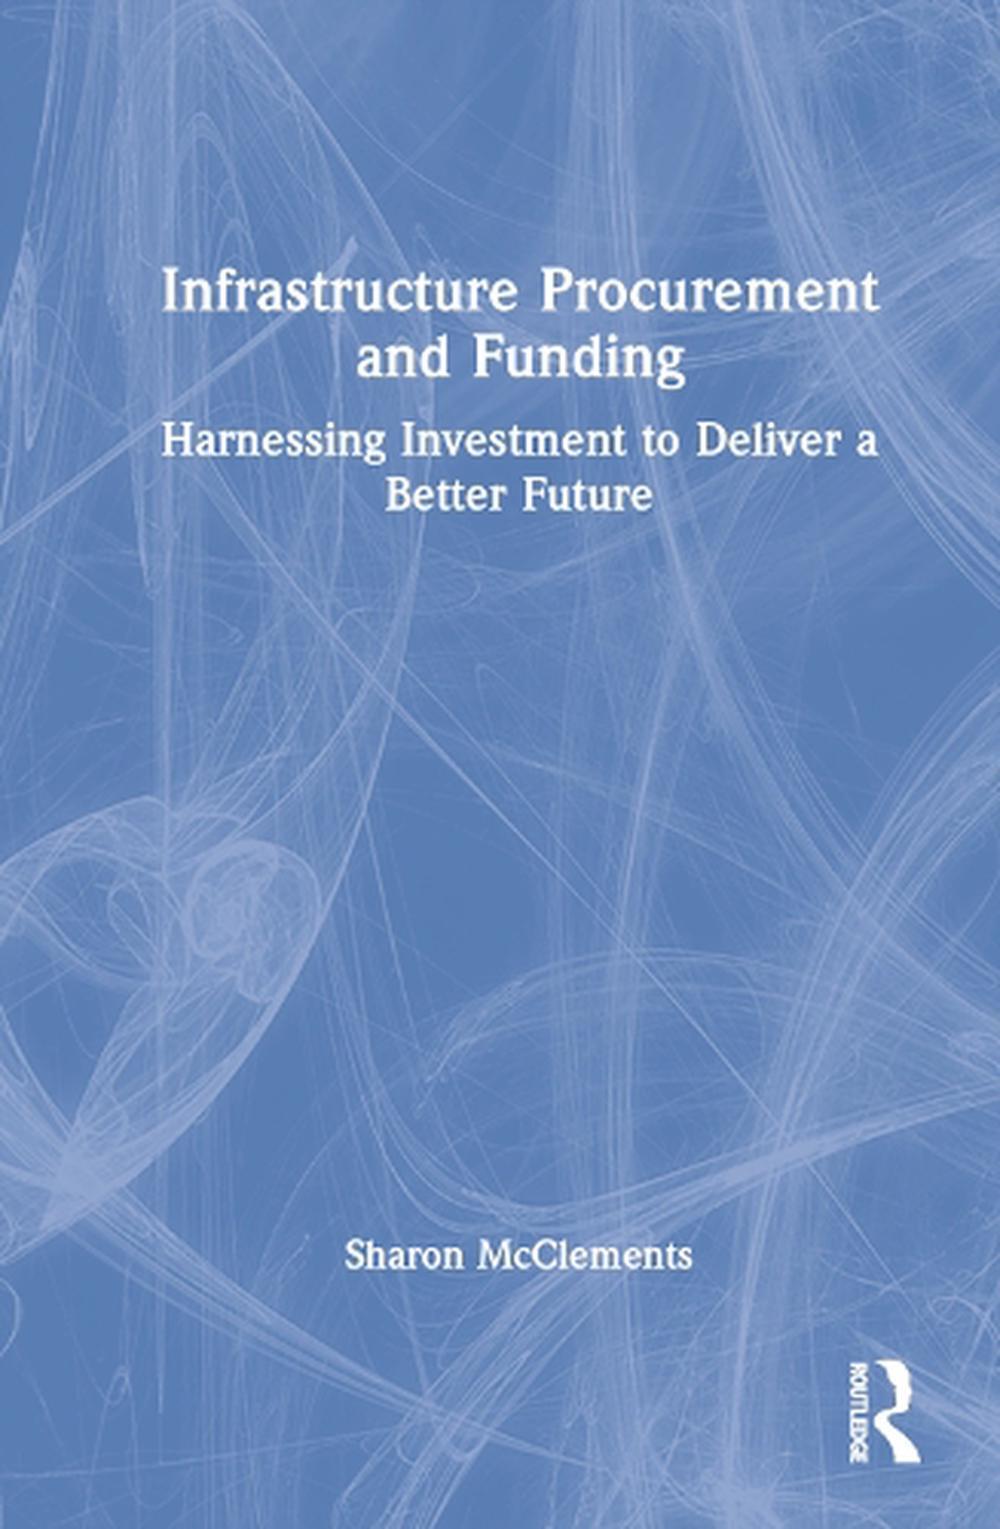 Infrastructure Procurement and Funding: Harnessing Investment to Deliver a Bette